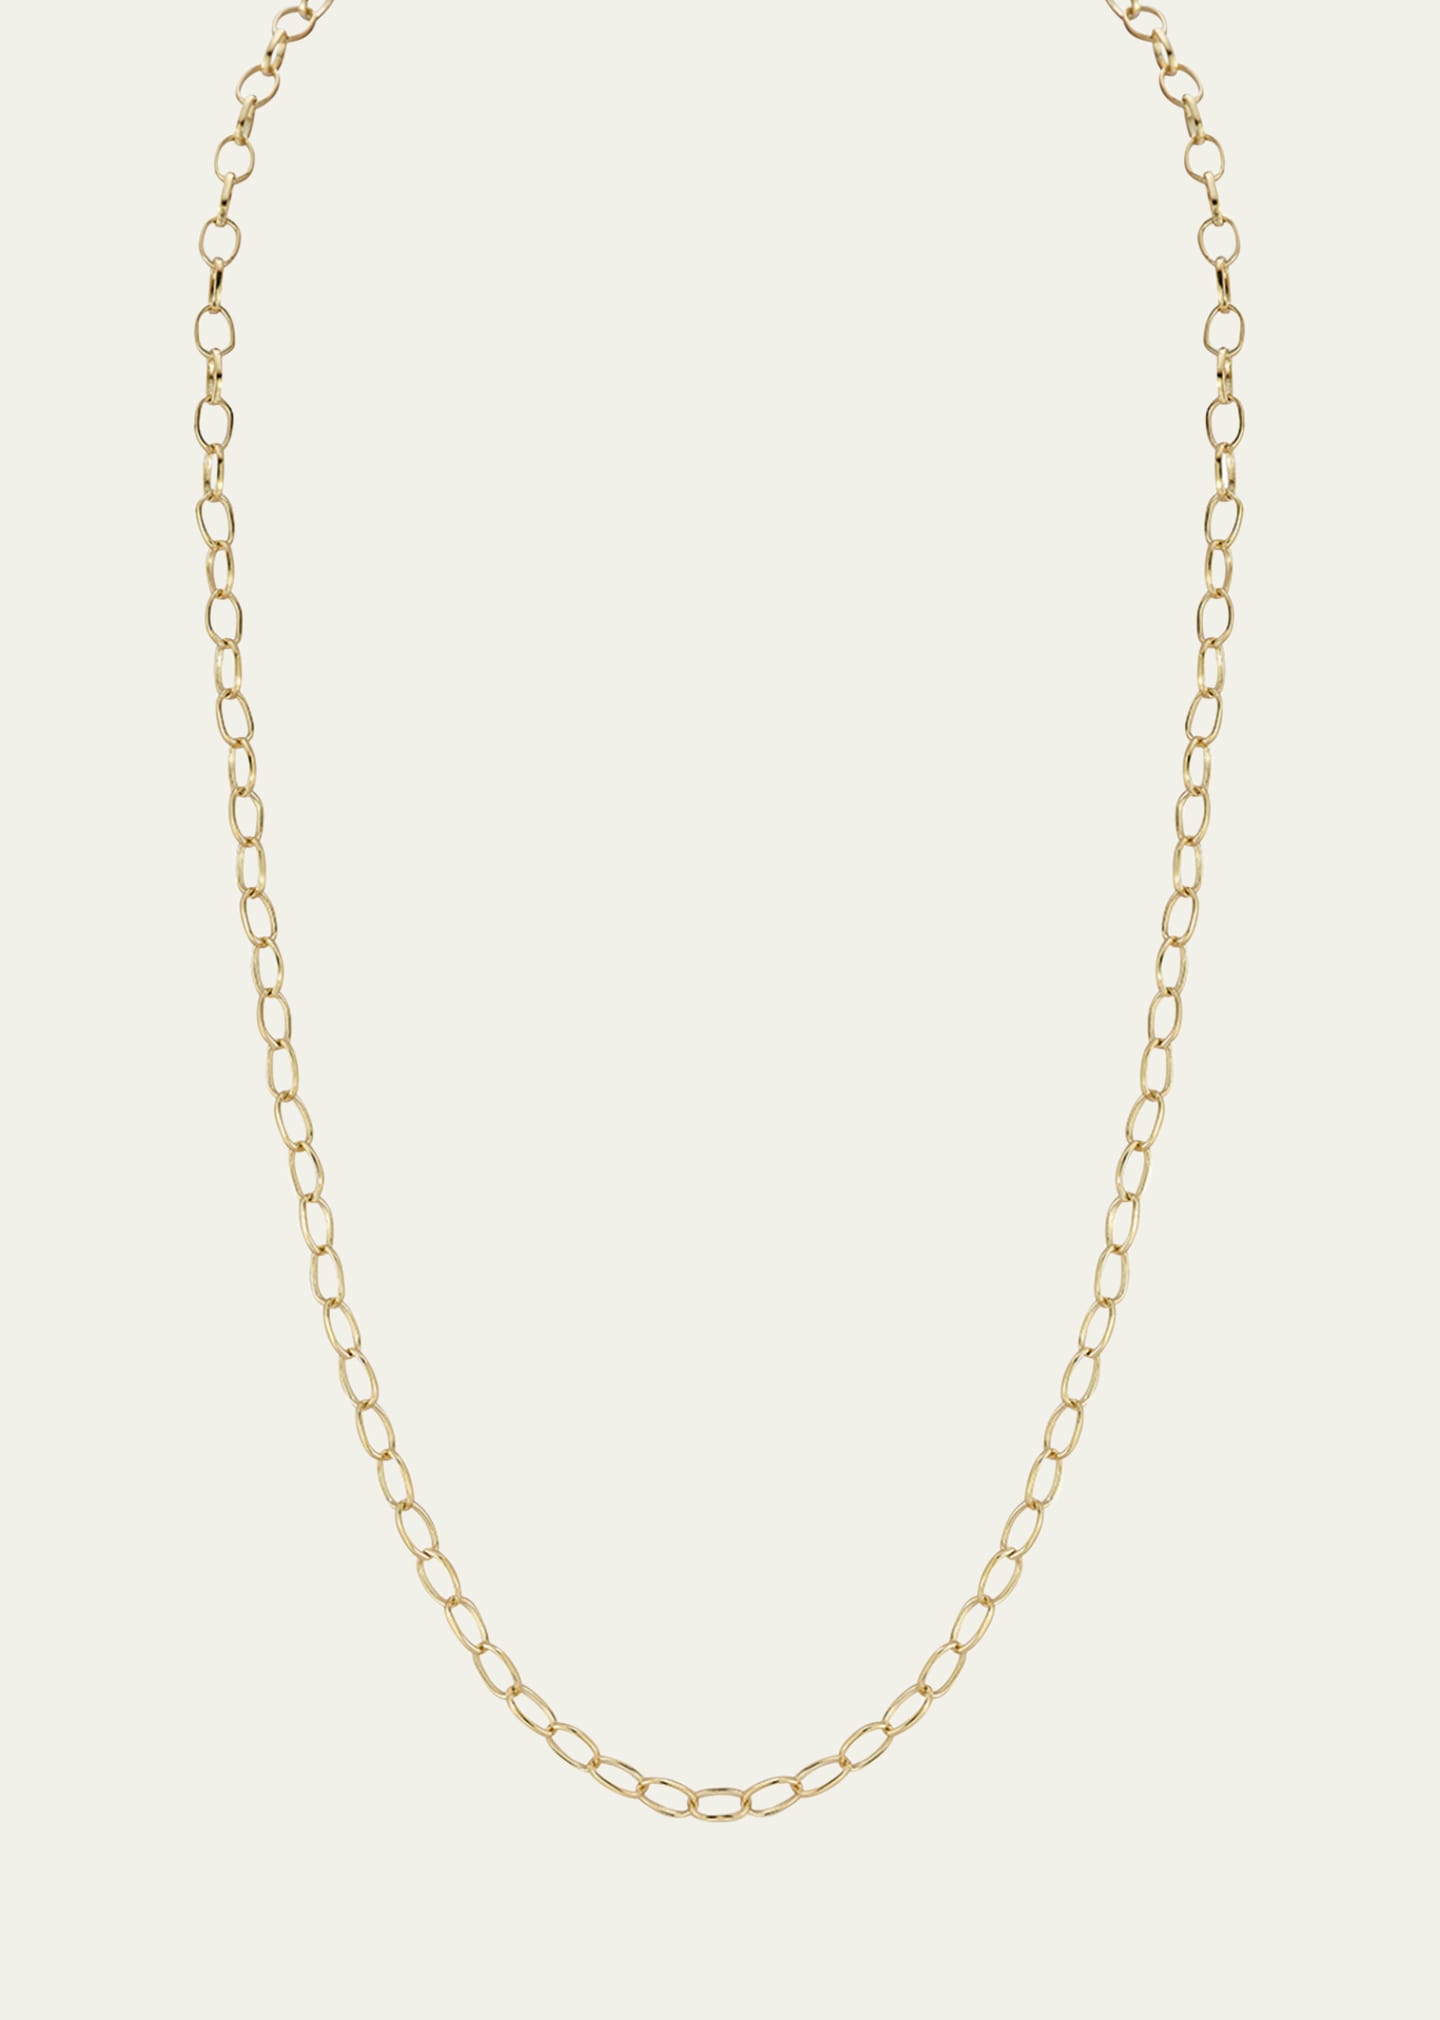 18K Yellow Gold Loop Chain Necklace, 18"L